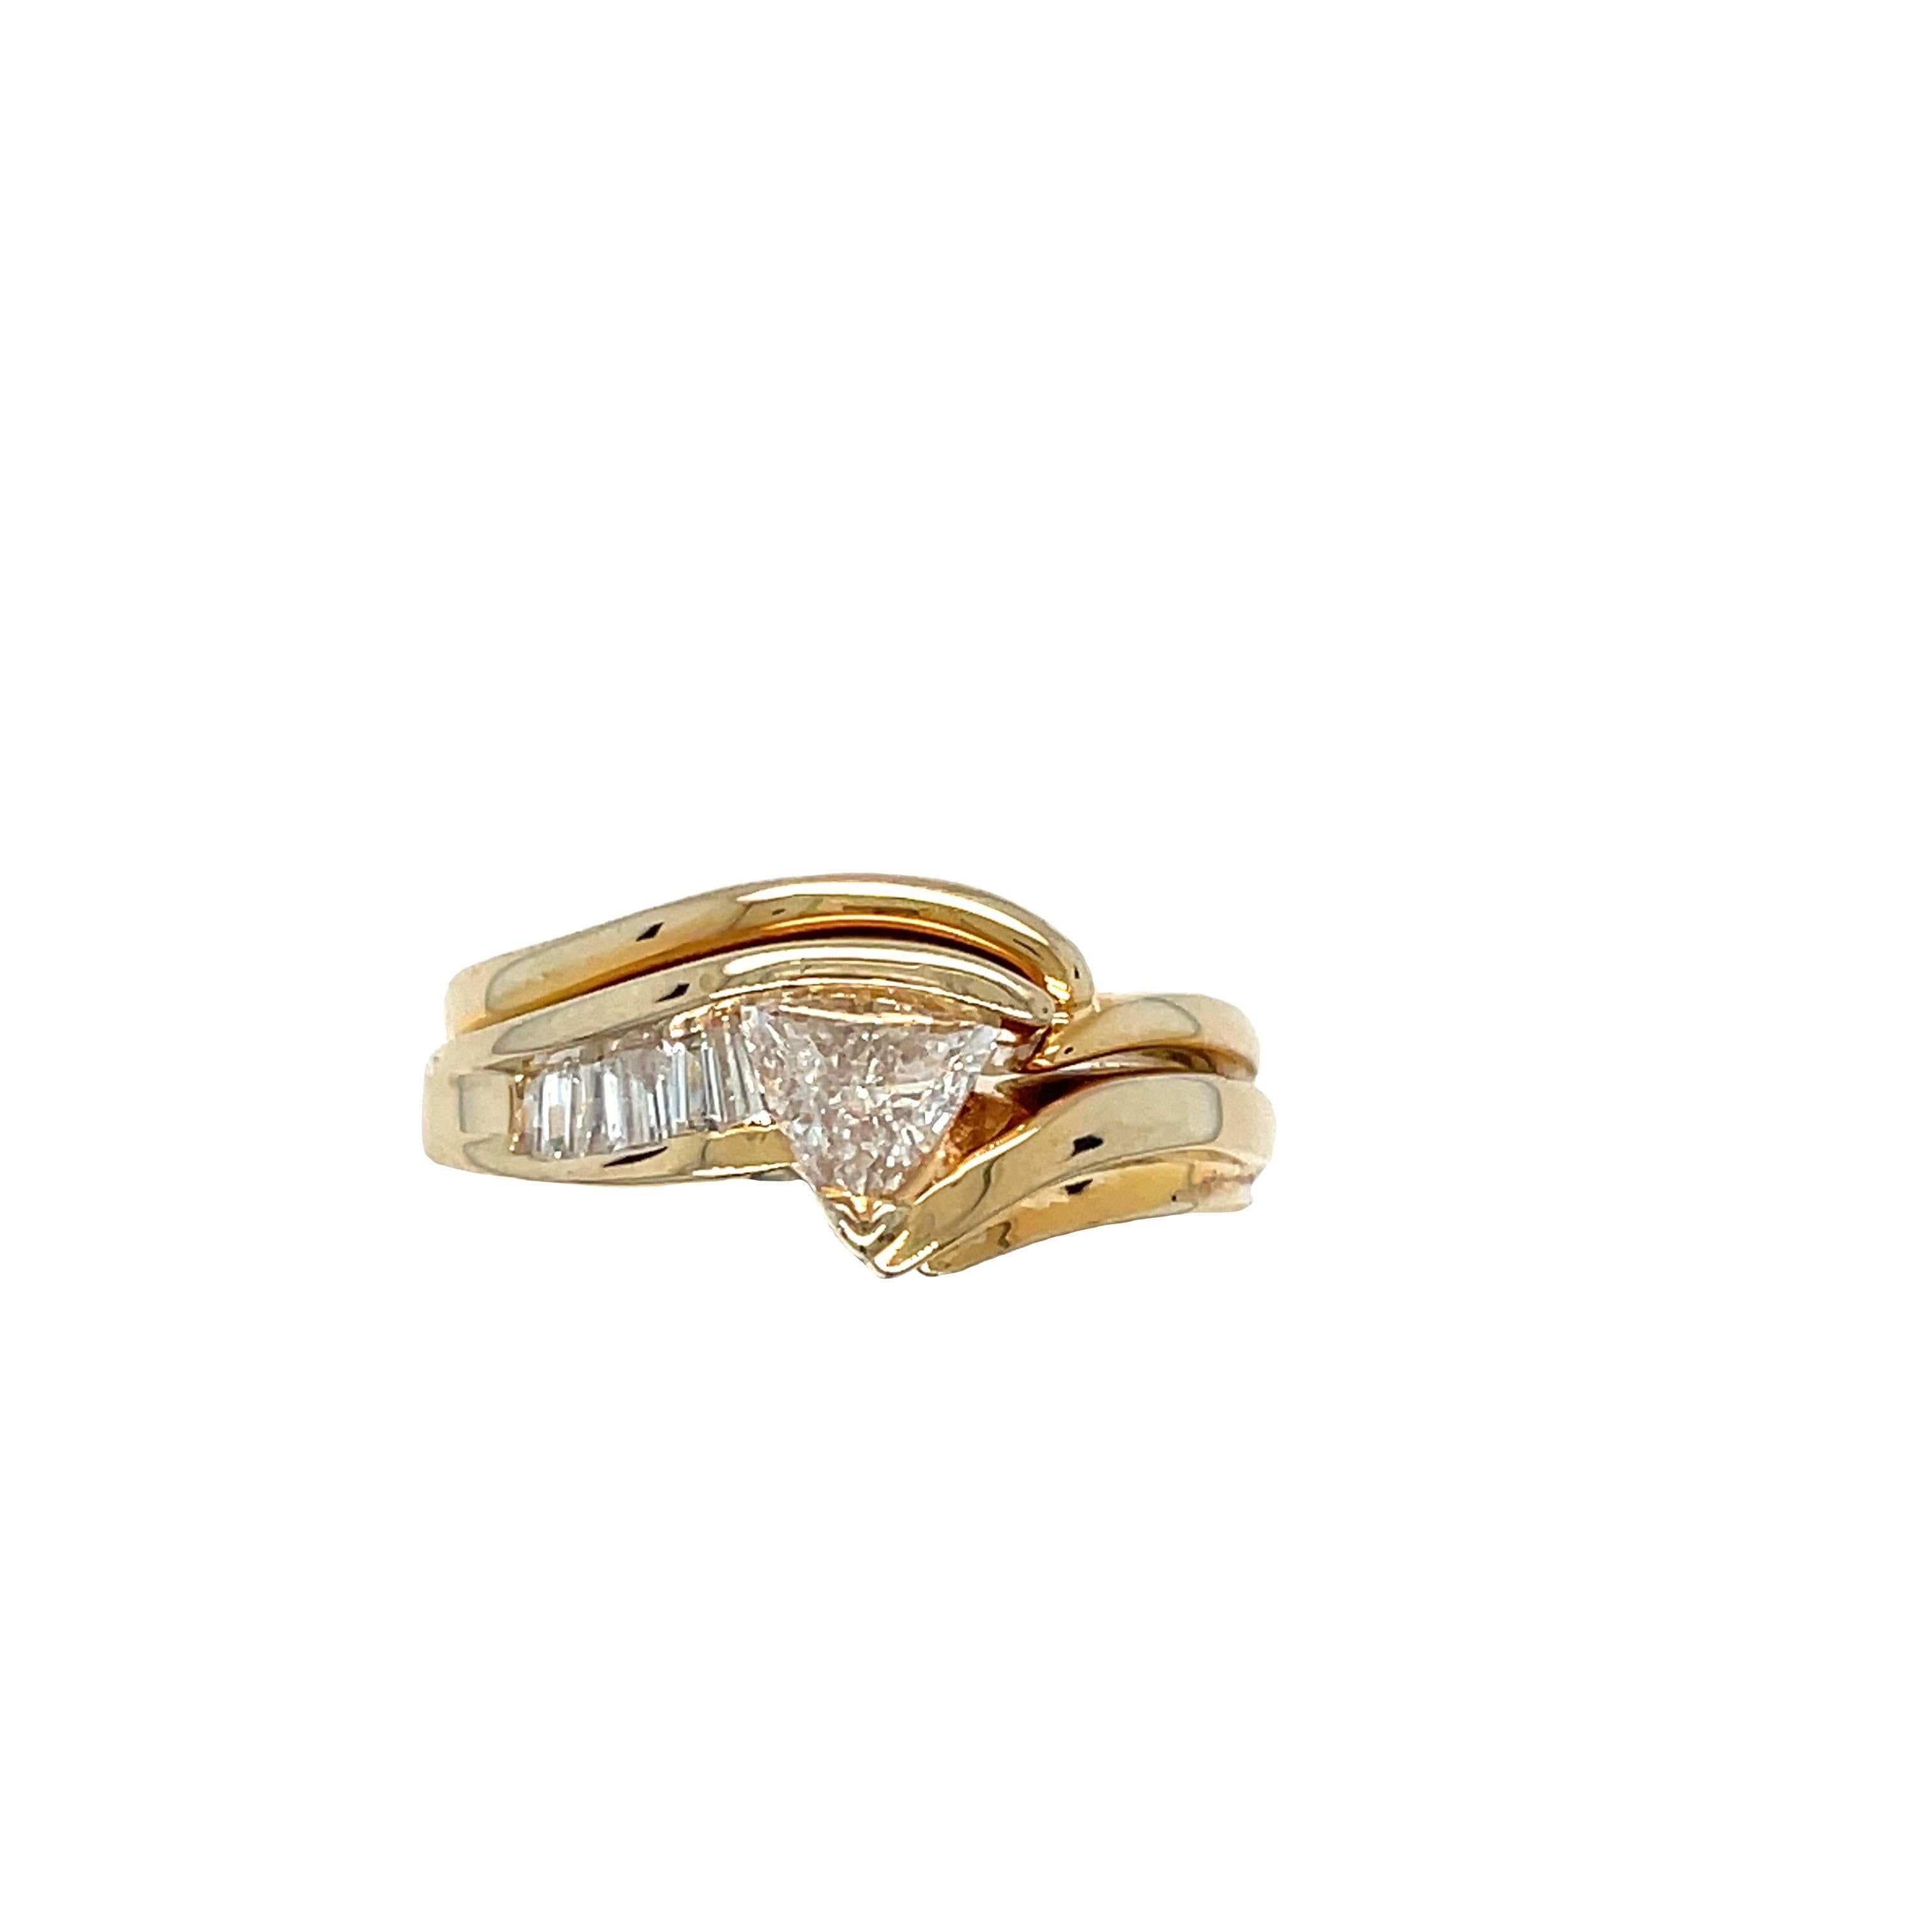 This stylish vintage ring is made of 14k yellow gold and features a sleek design. It showcases a beautiful trillion cut diamond at the center, estimated to be 0.45 carat, surrounded by double swirls. The side of the ring is adorned with a channel